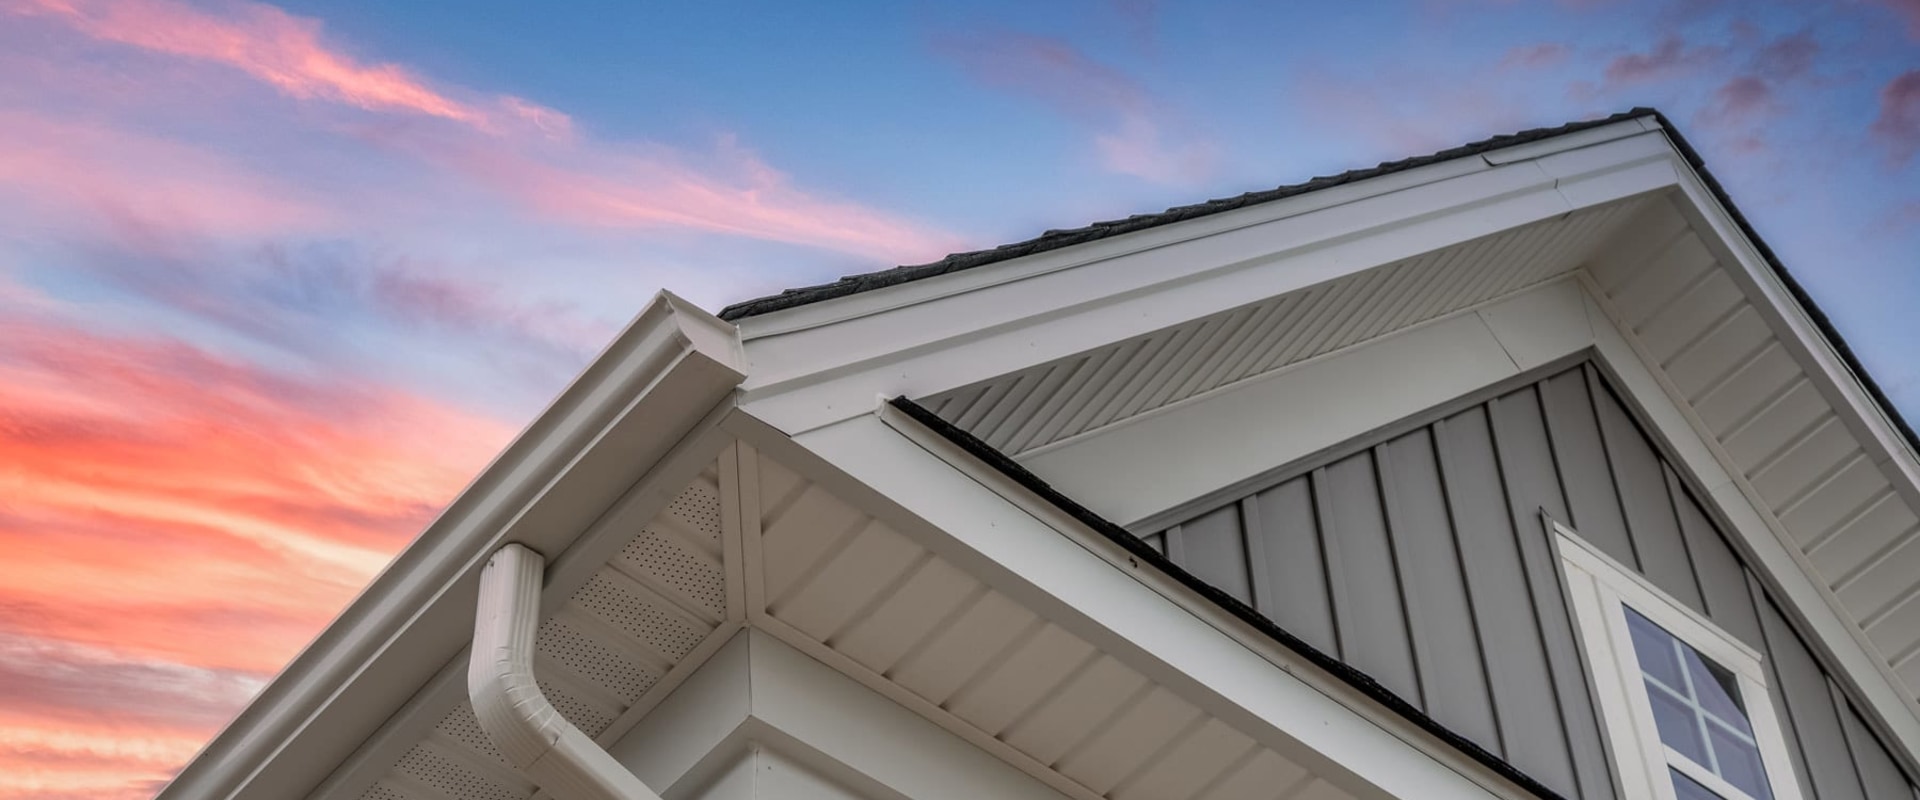 How much does home depot charge for gutter install?